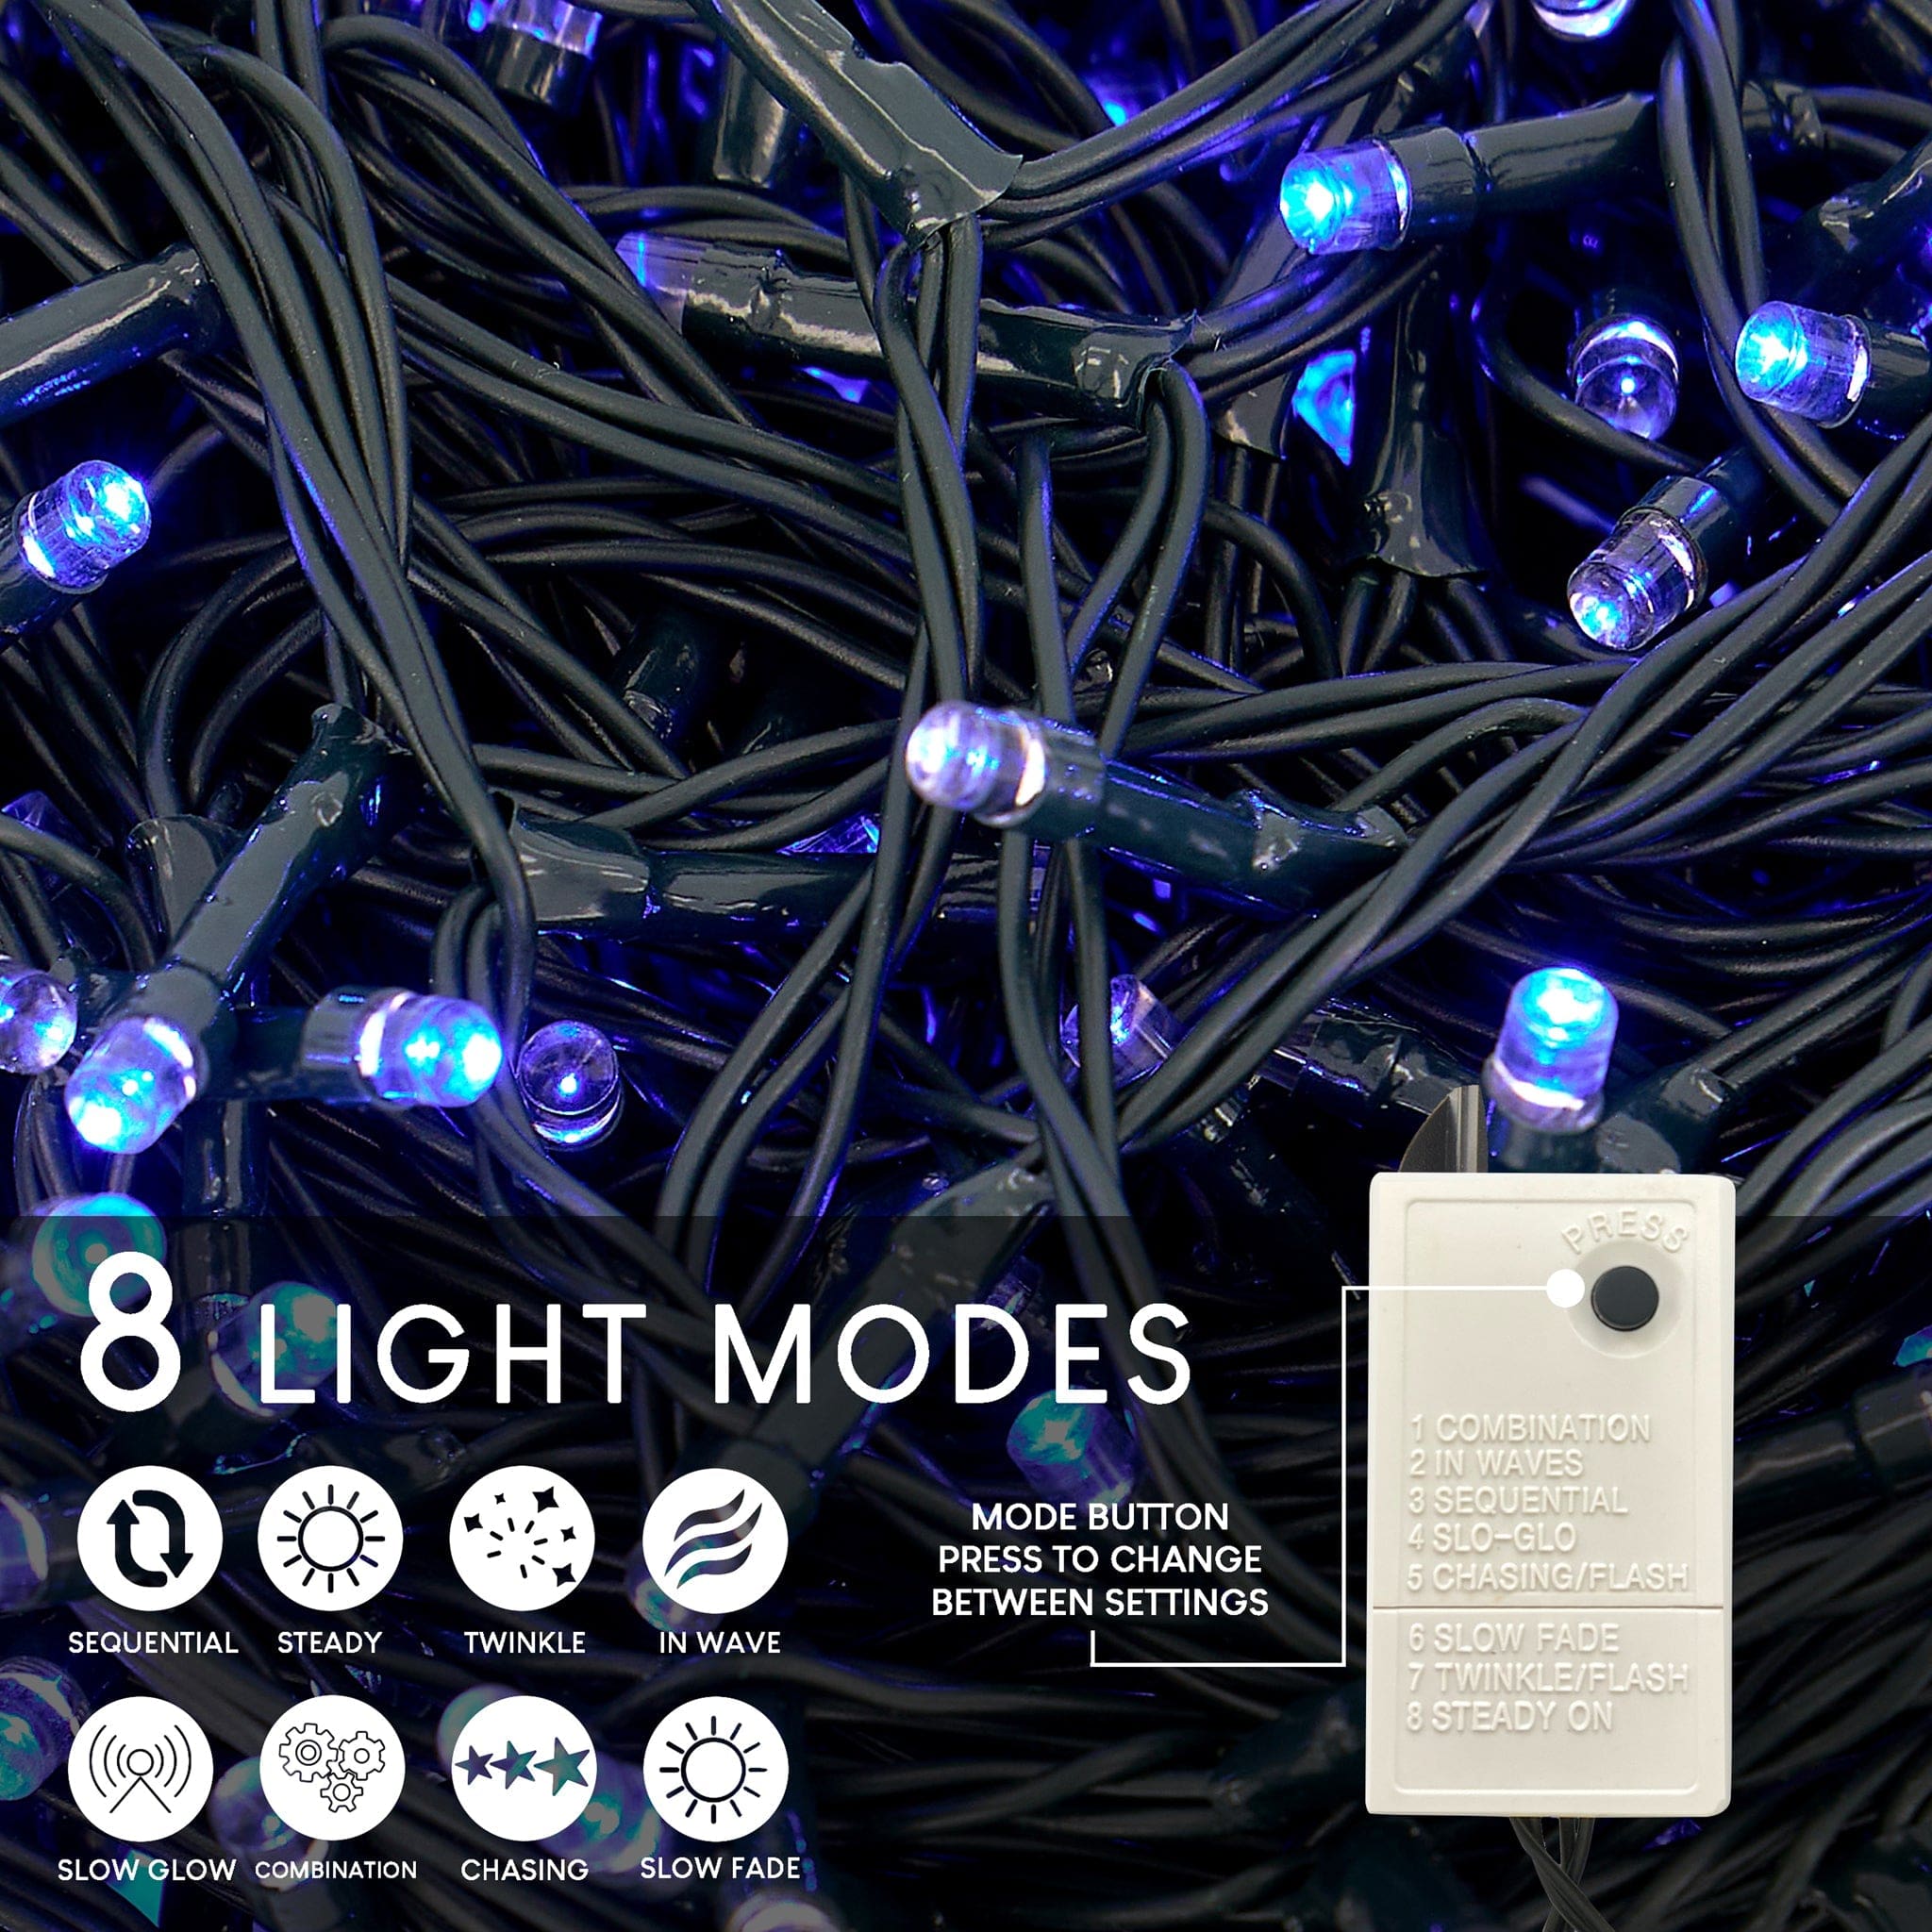 Indoor/Outdoor 8 Function LED Waterproof Fairy Lights with Green Cable (1000 Lights - 35M Cable) - Blue Lights 5056150226222 only5pounds-com